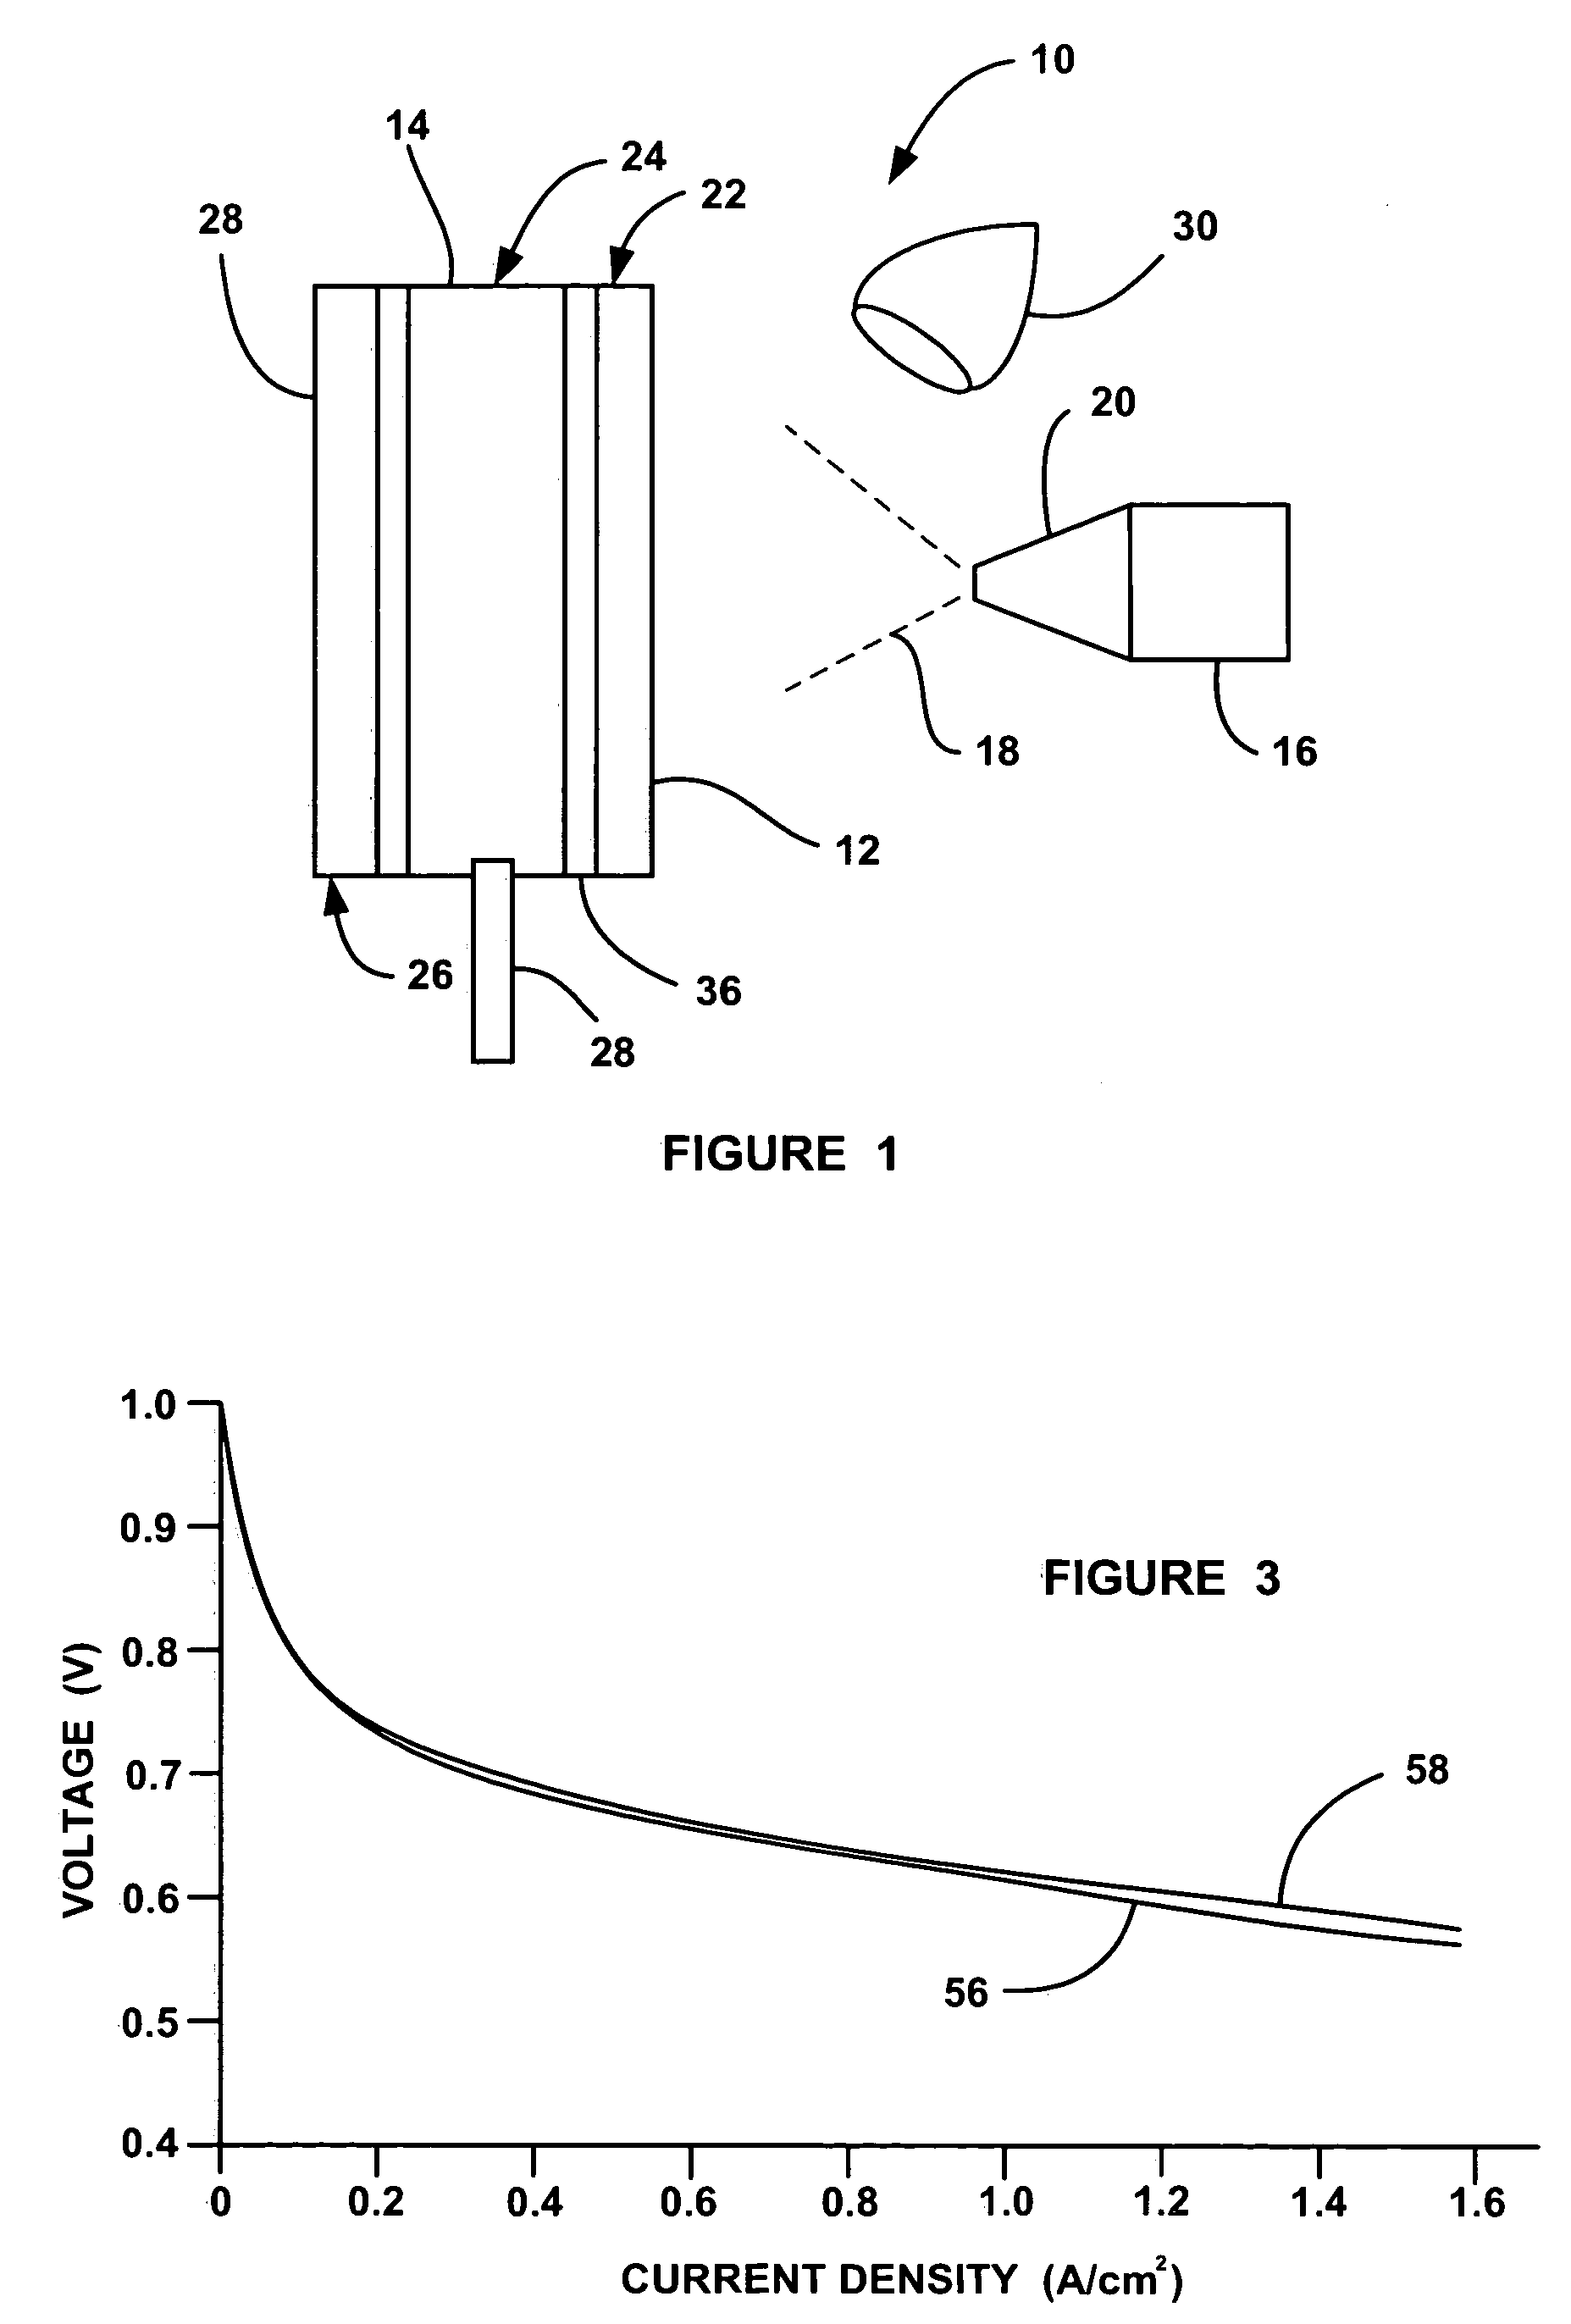 Membrane electrode assembly prepared by direct spray of catalyst to membrane